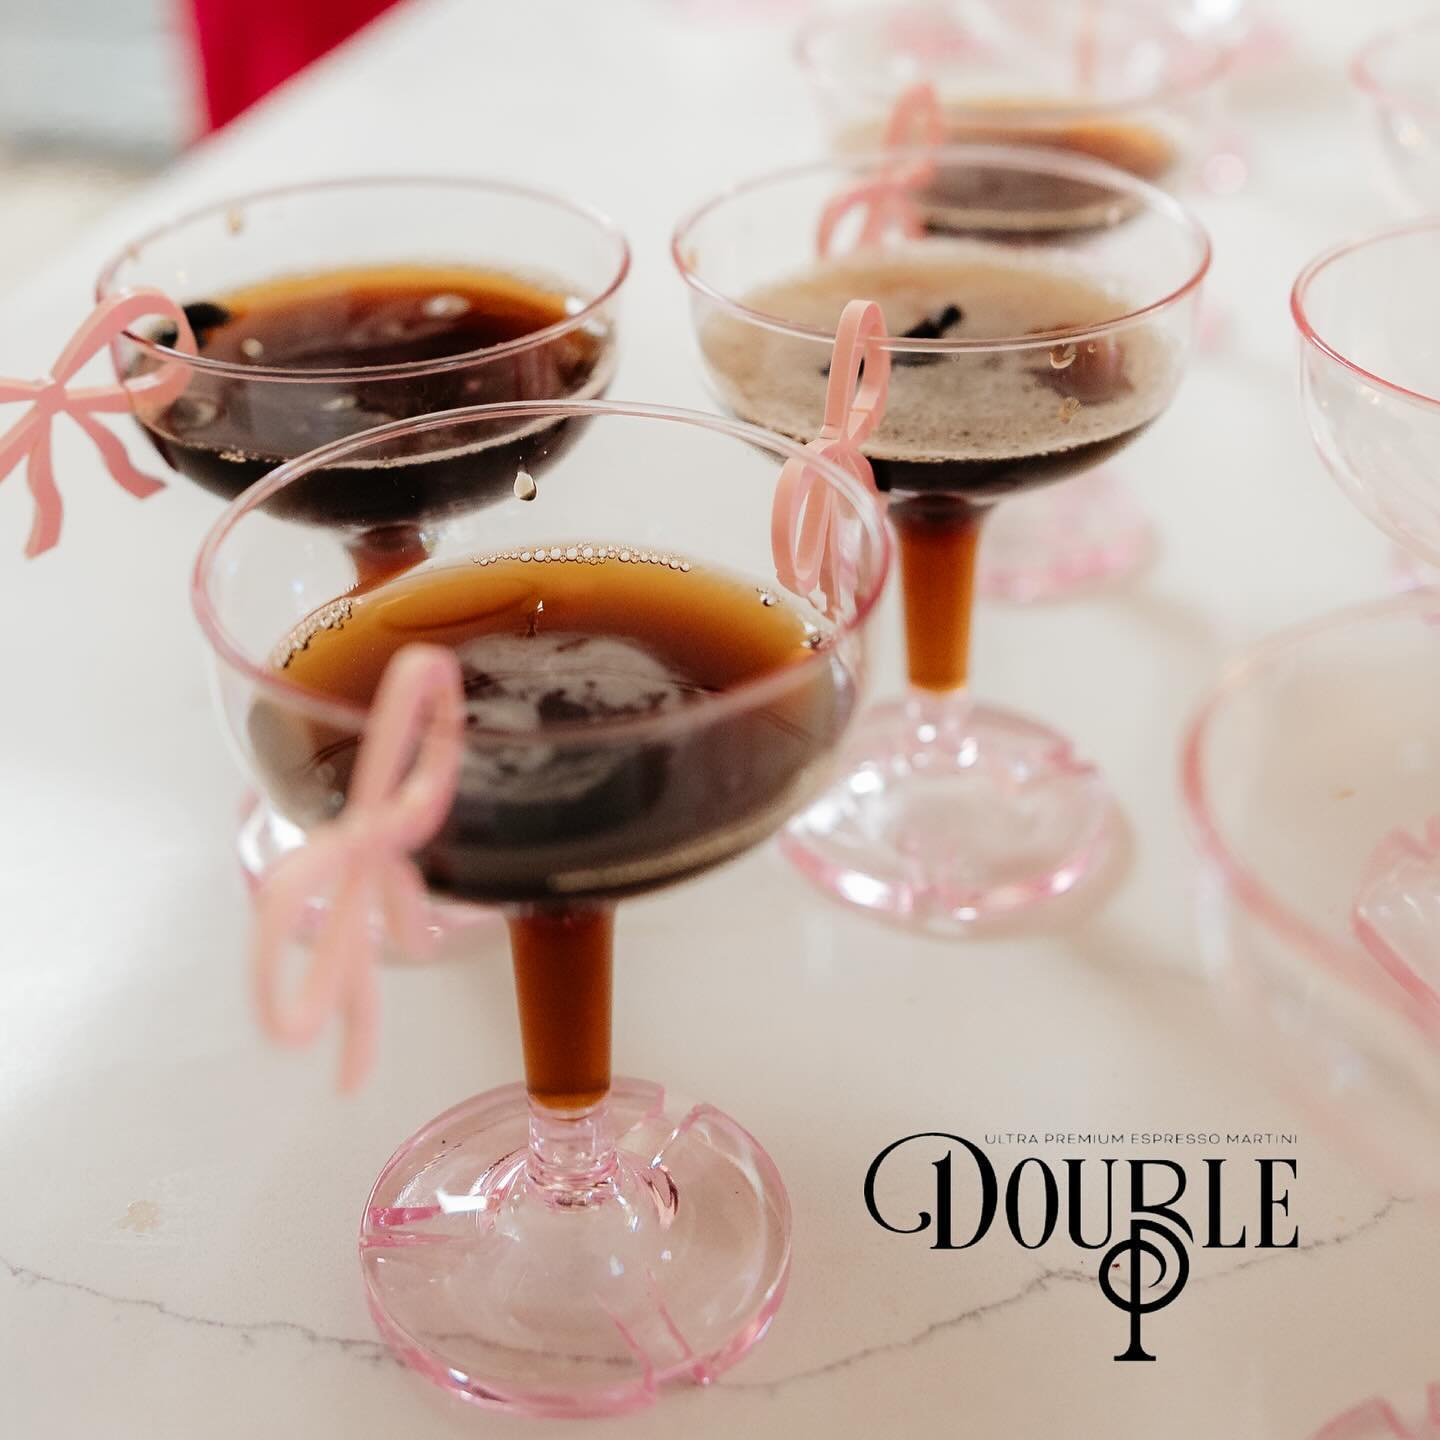 Espresso martini please ☝🏻🍸💋 @thedoublepespressomartini

We can&rsquo;t get over how obsessed we are with this bottled, premixed espresso martini! Perfect for in the morning with brunch, evening with dinner or let&rsquo;s be real, anytime 💁🏼&zwj